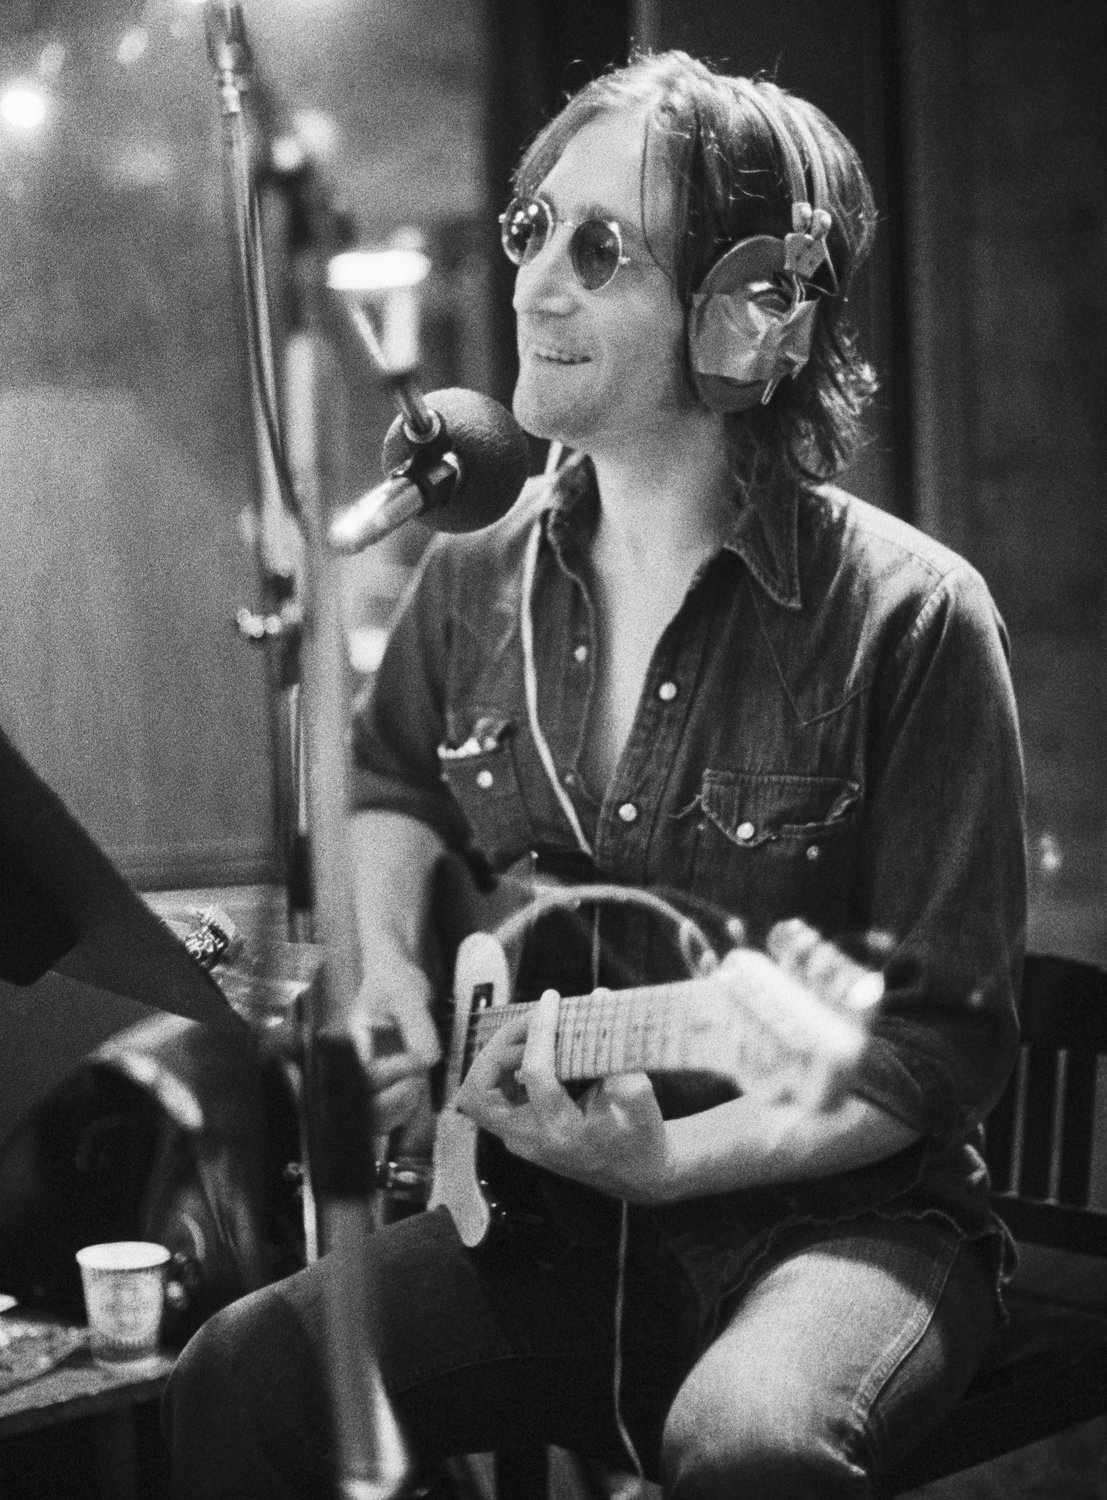 John Lennon recording "Walls and Bridges" at the Record Plant, NYC. 1974. Please contact Bob Gruen's studio to purchase a print or license this photo. email: nfo@bobgruen.com